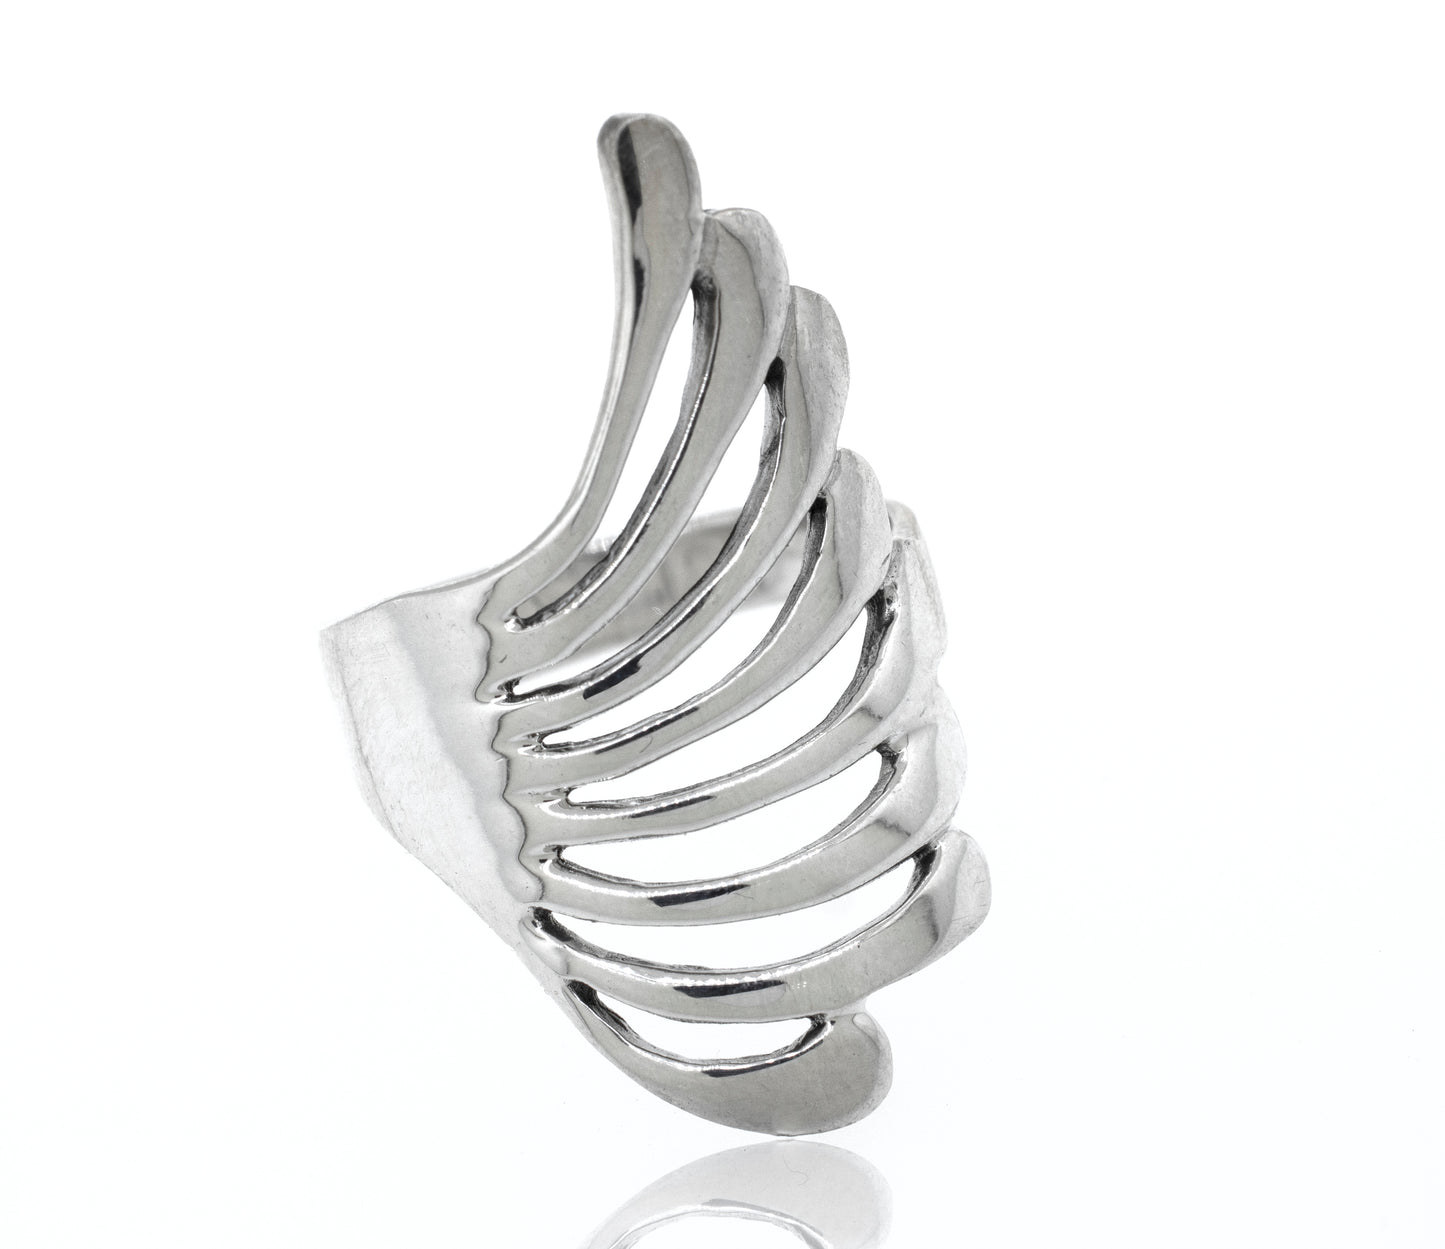 A high polish Super Silver wing ring with fan design on a white background.